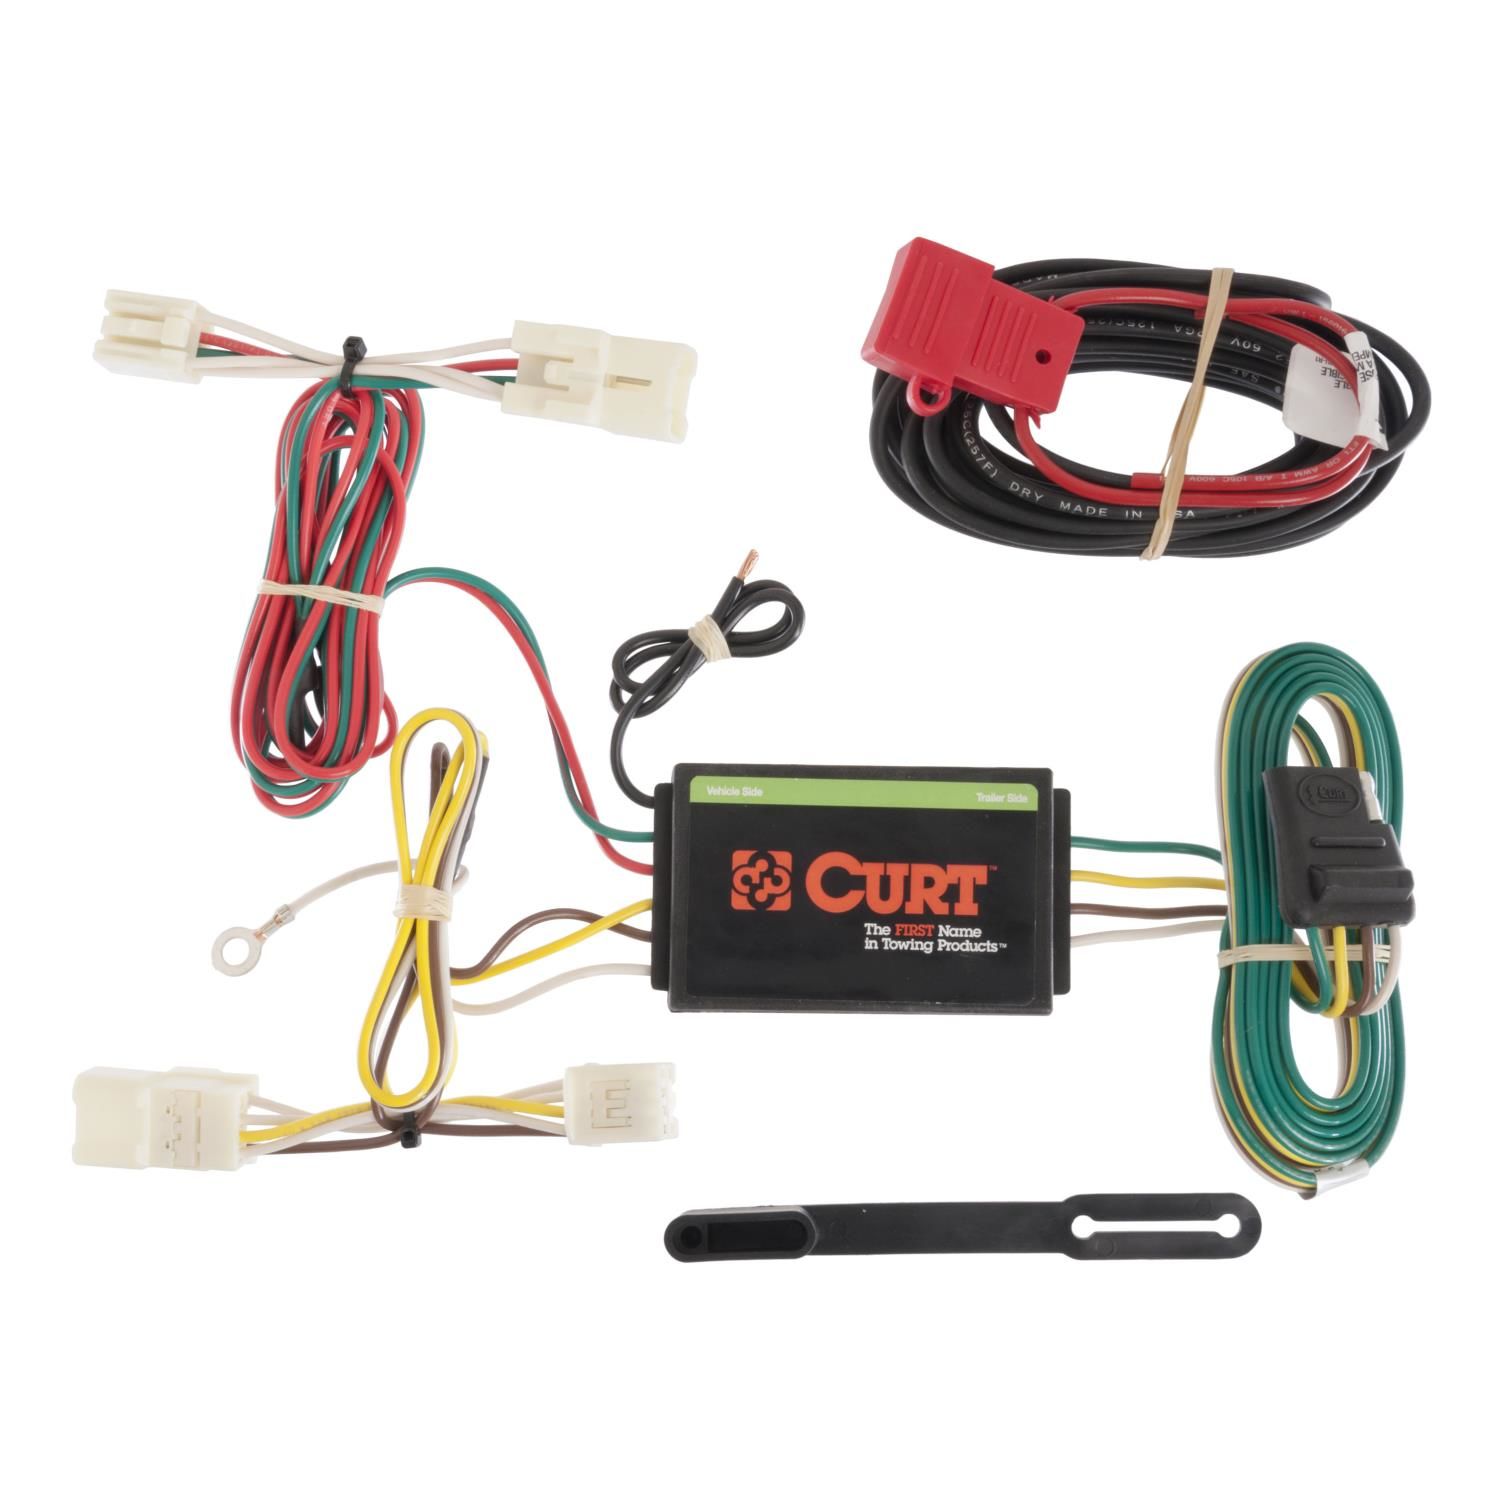 Curt Trailer Wire Harness and Connector 56165